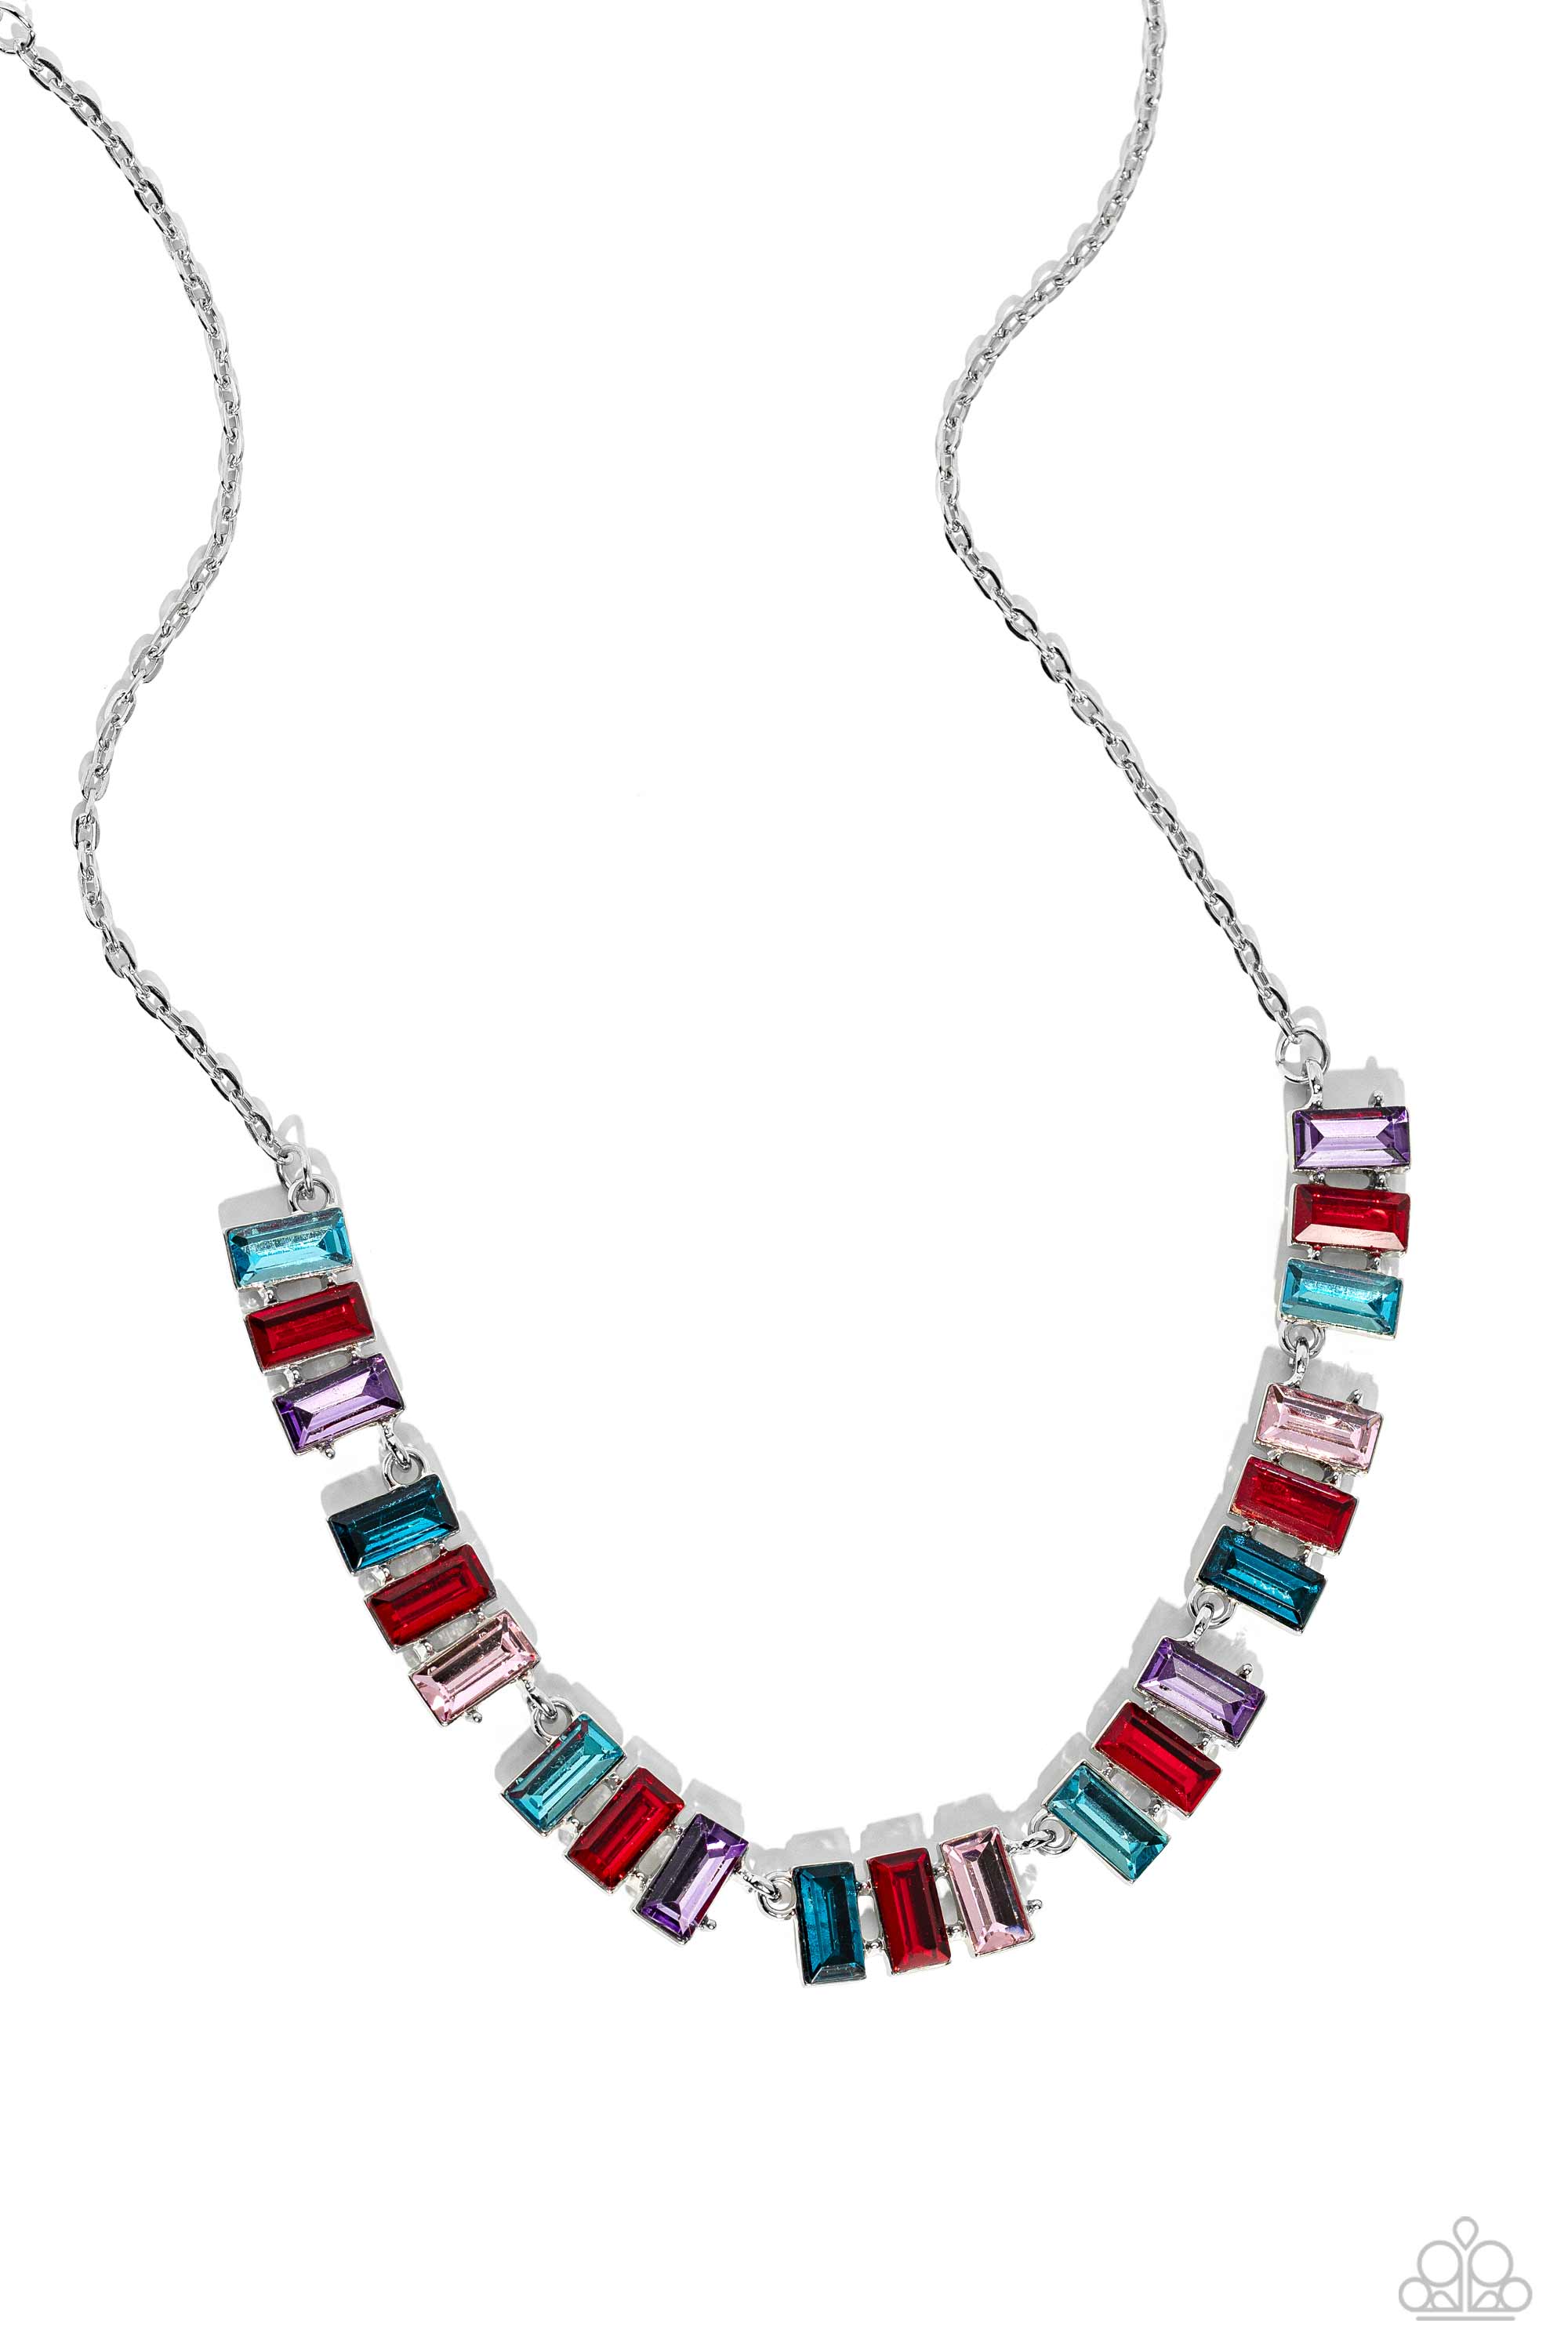 Elite Emeralds Red Necklace - Paparazzi Accessories- lightbox - CarasShop.com - $5 Jewelry by Cara Jewels